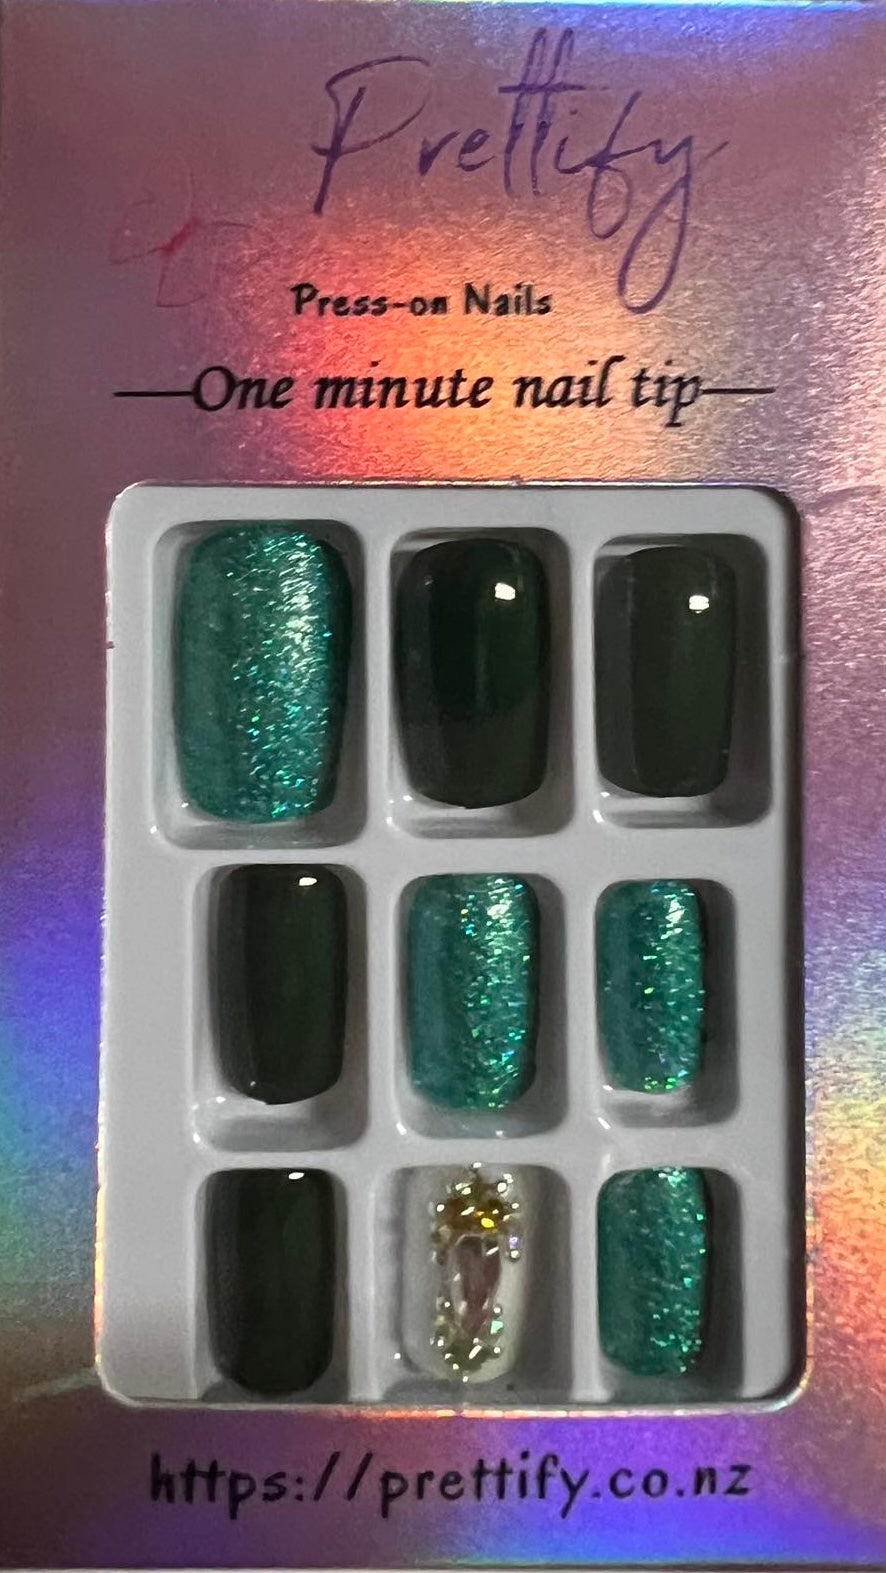 Square Press on Nails. Dark Green & Bright Green with Glitter & White with Jewels. Durable Acrylic Press on Nails. Easy and quick to apply. Great for those special occasions, parties or add an edge to any outfit. Gorgeous, flattering and you can re-use them again and again.